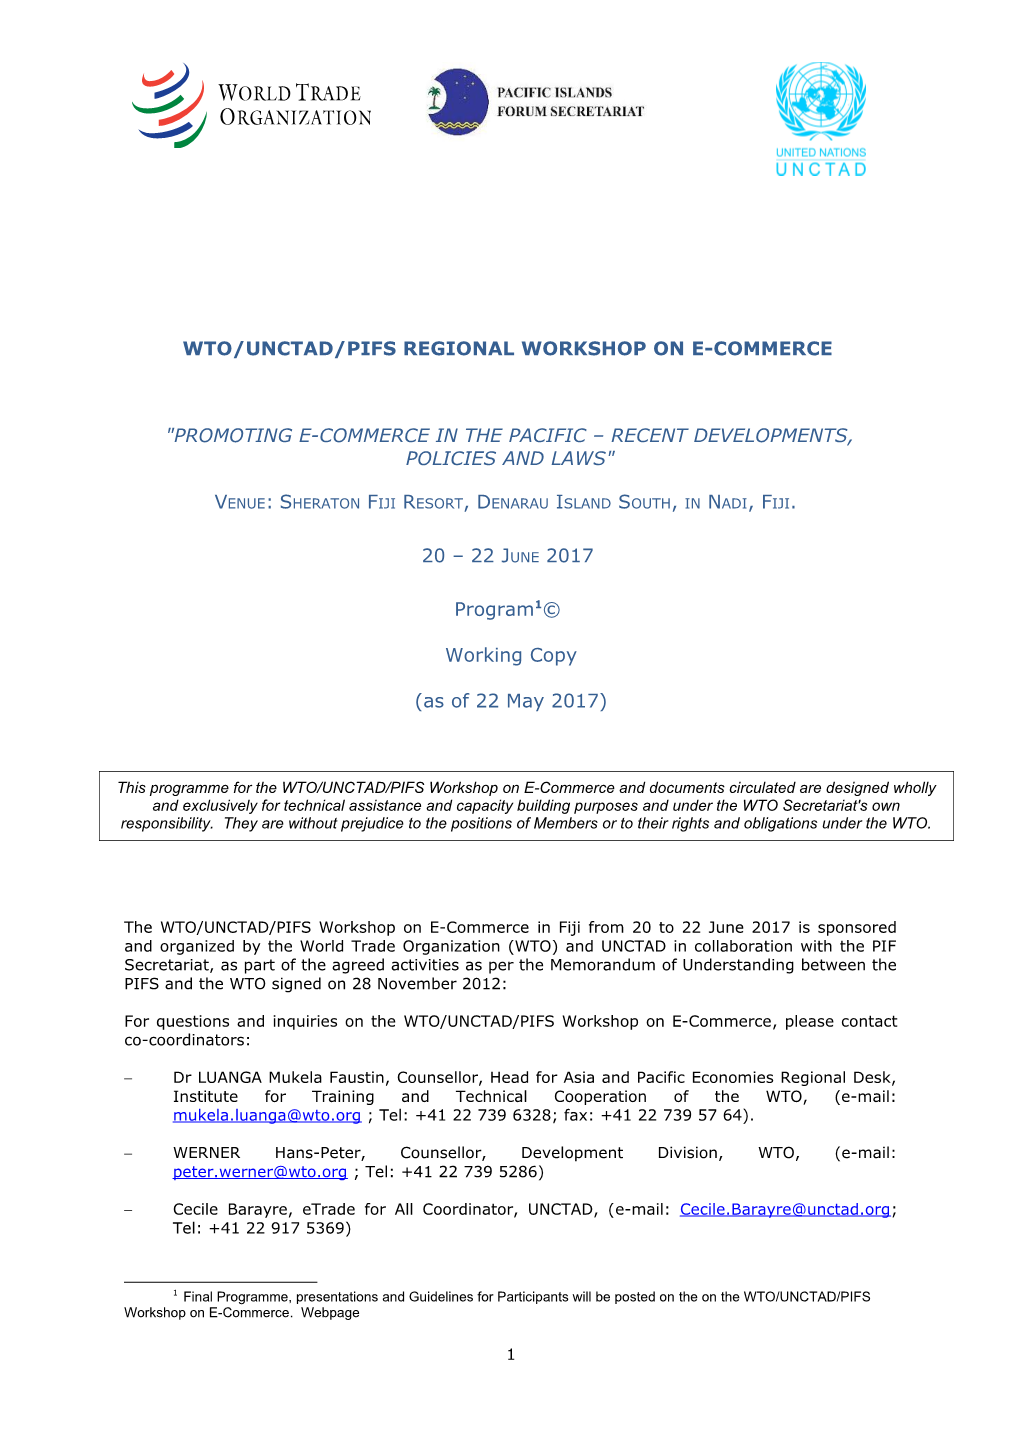 WTO/UNCTAD/PIFS REGIONAL Workshop on E-COMMERCE